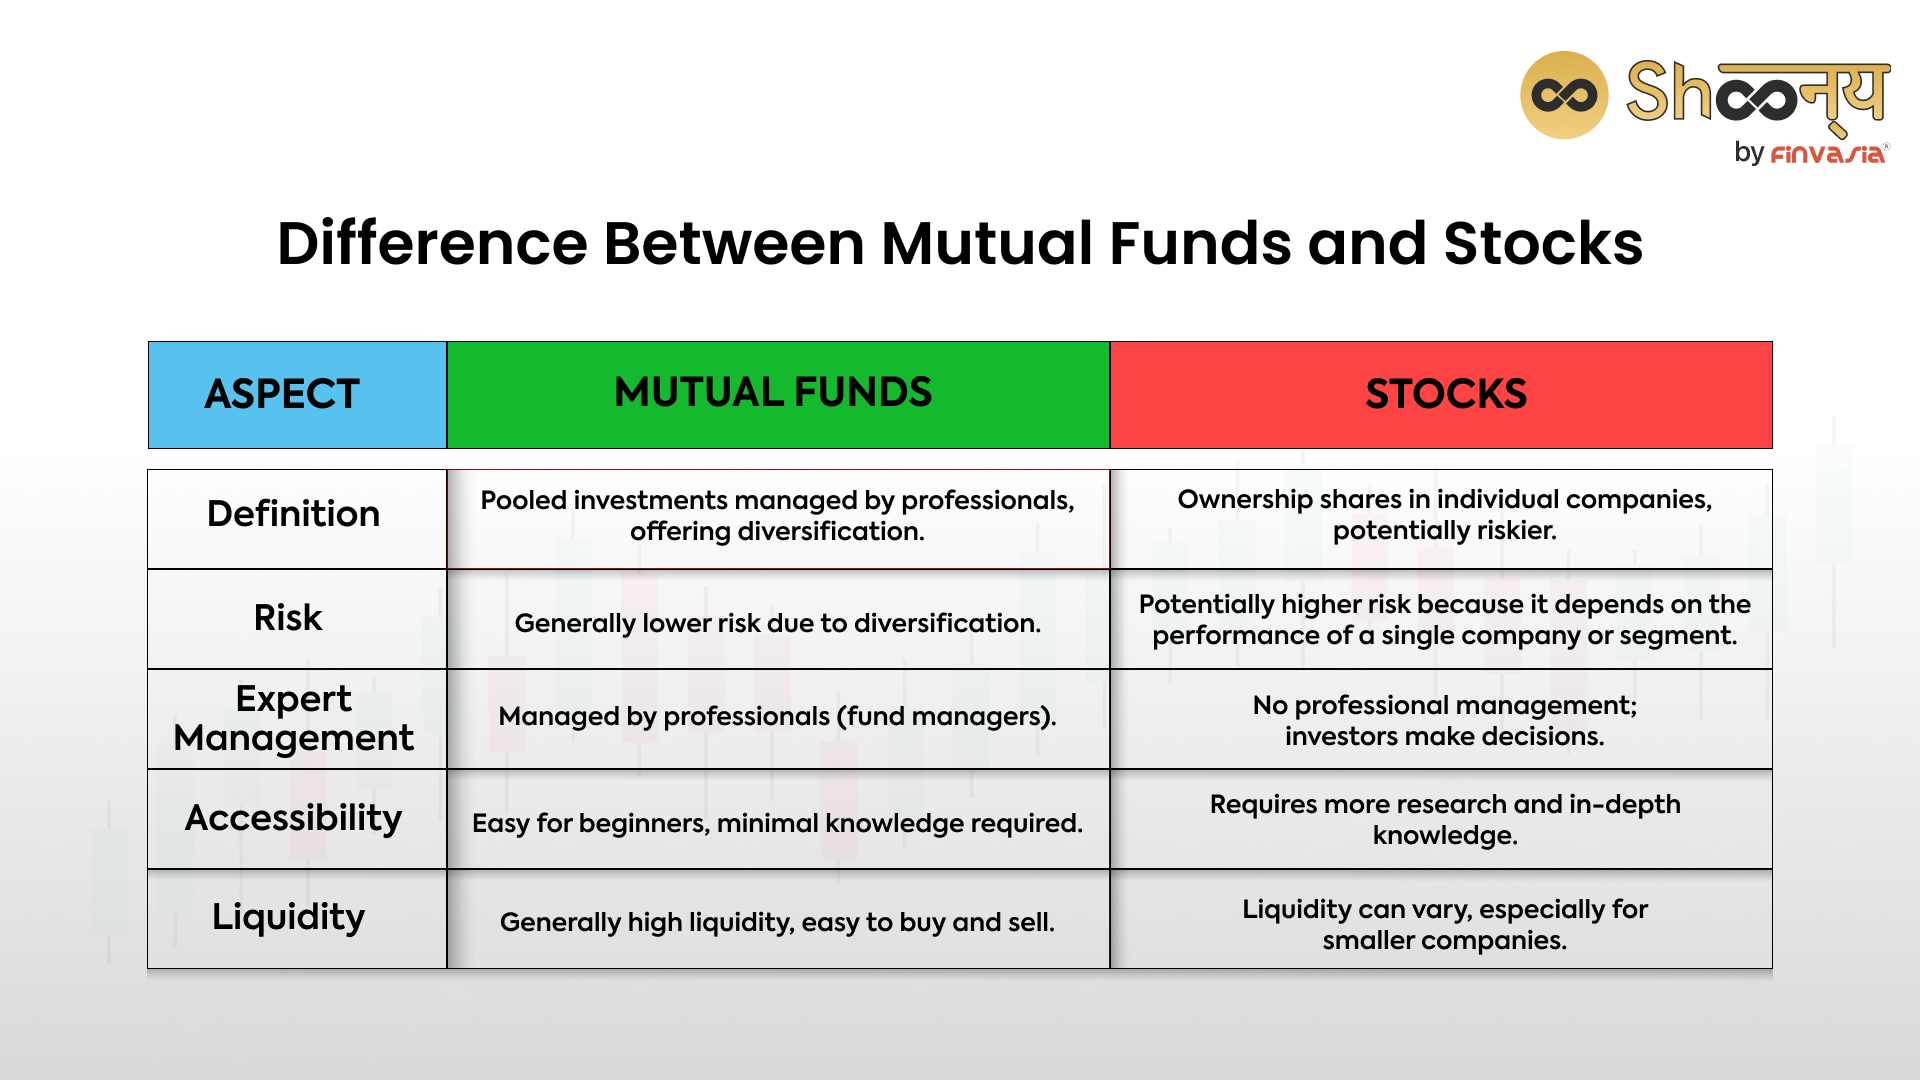 Difference Between Mutual Funds and Stocks
